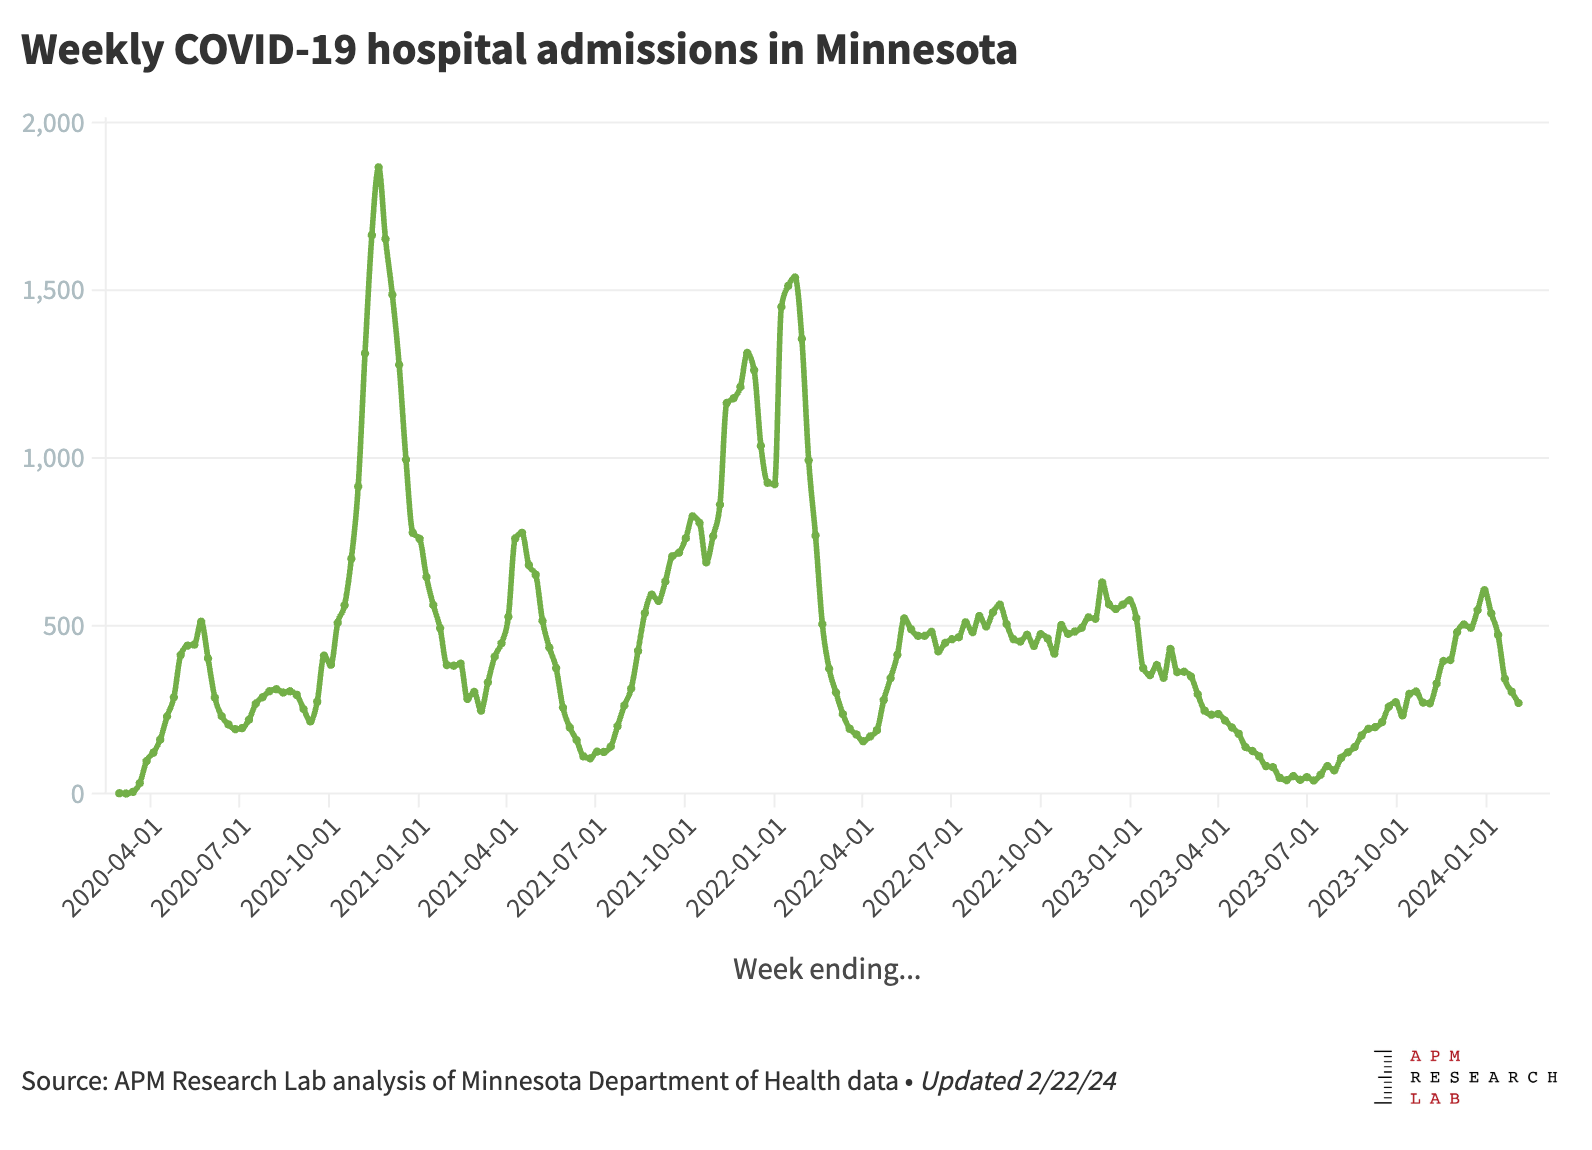 Graph showing declines in COVID-19 hospitalizations in Minnesota